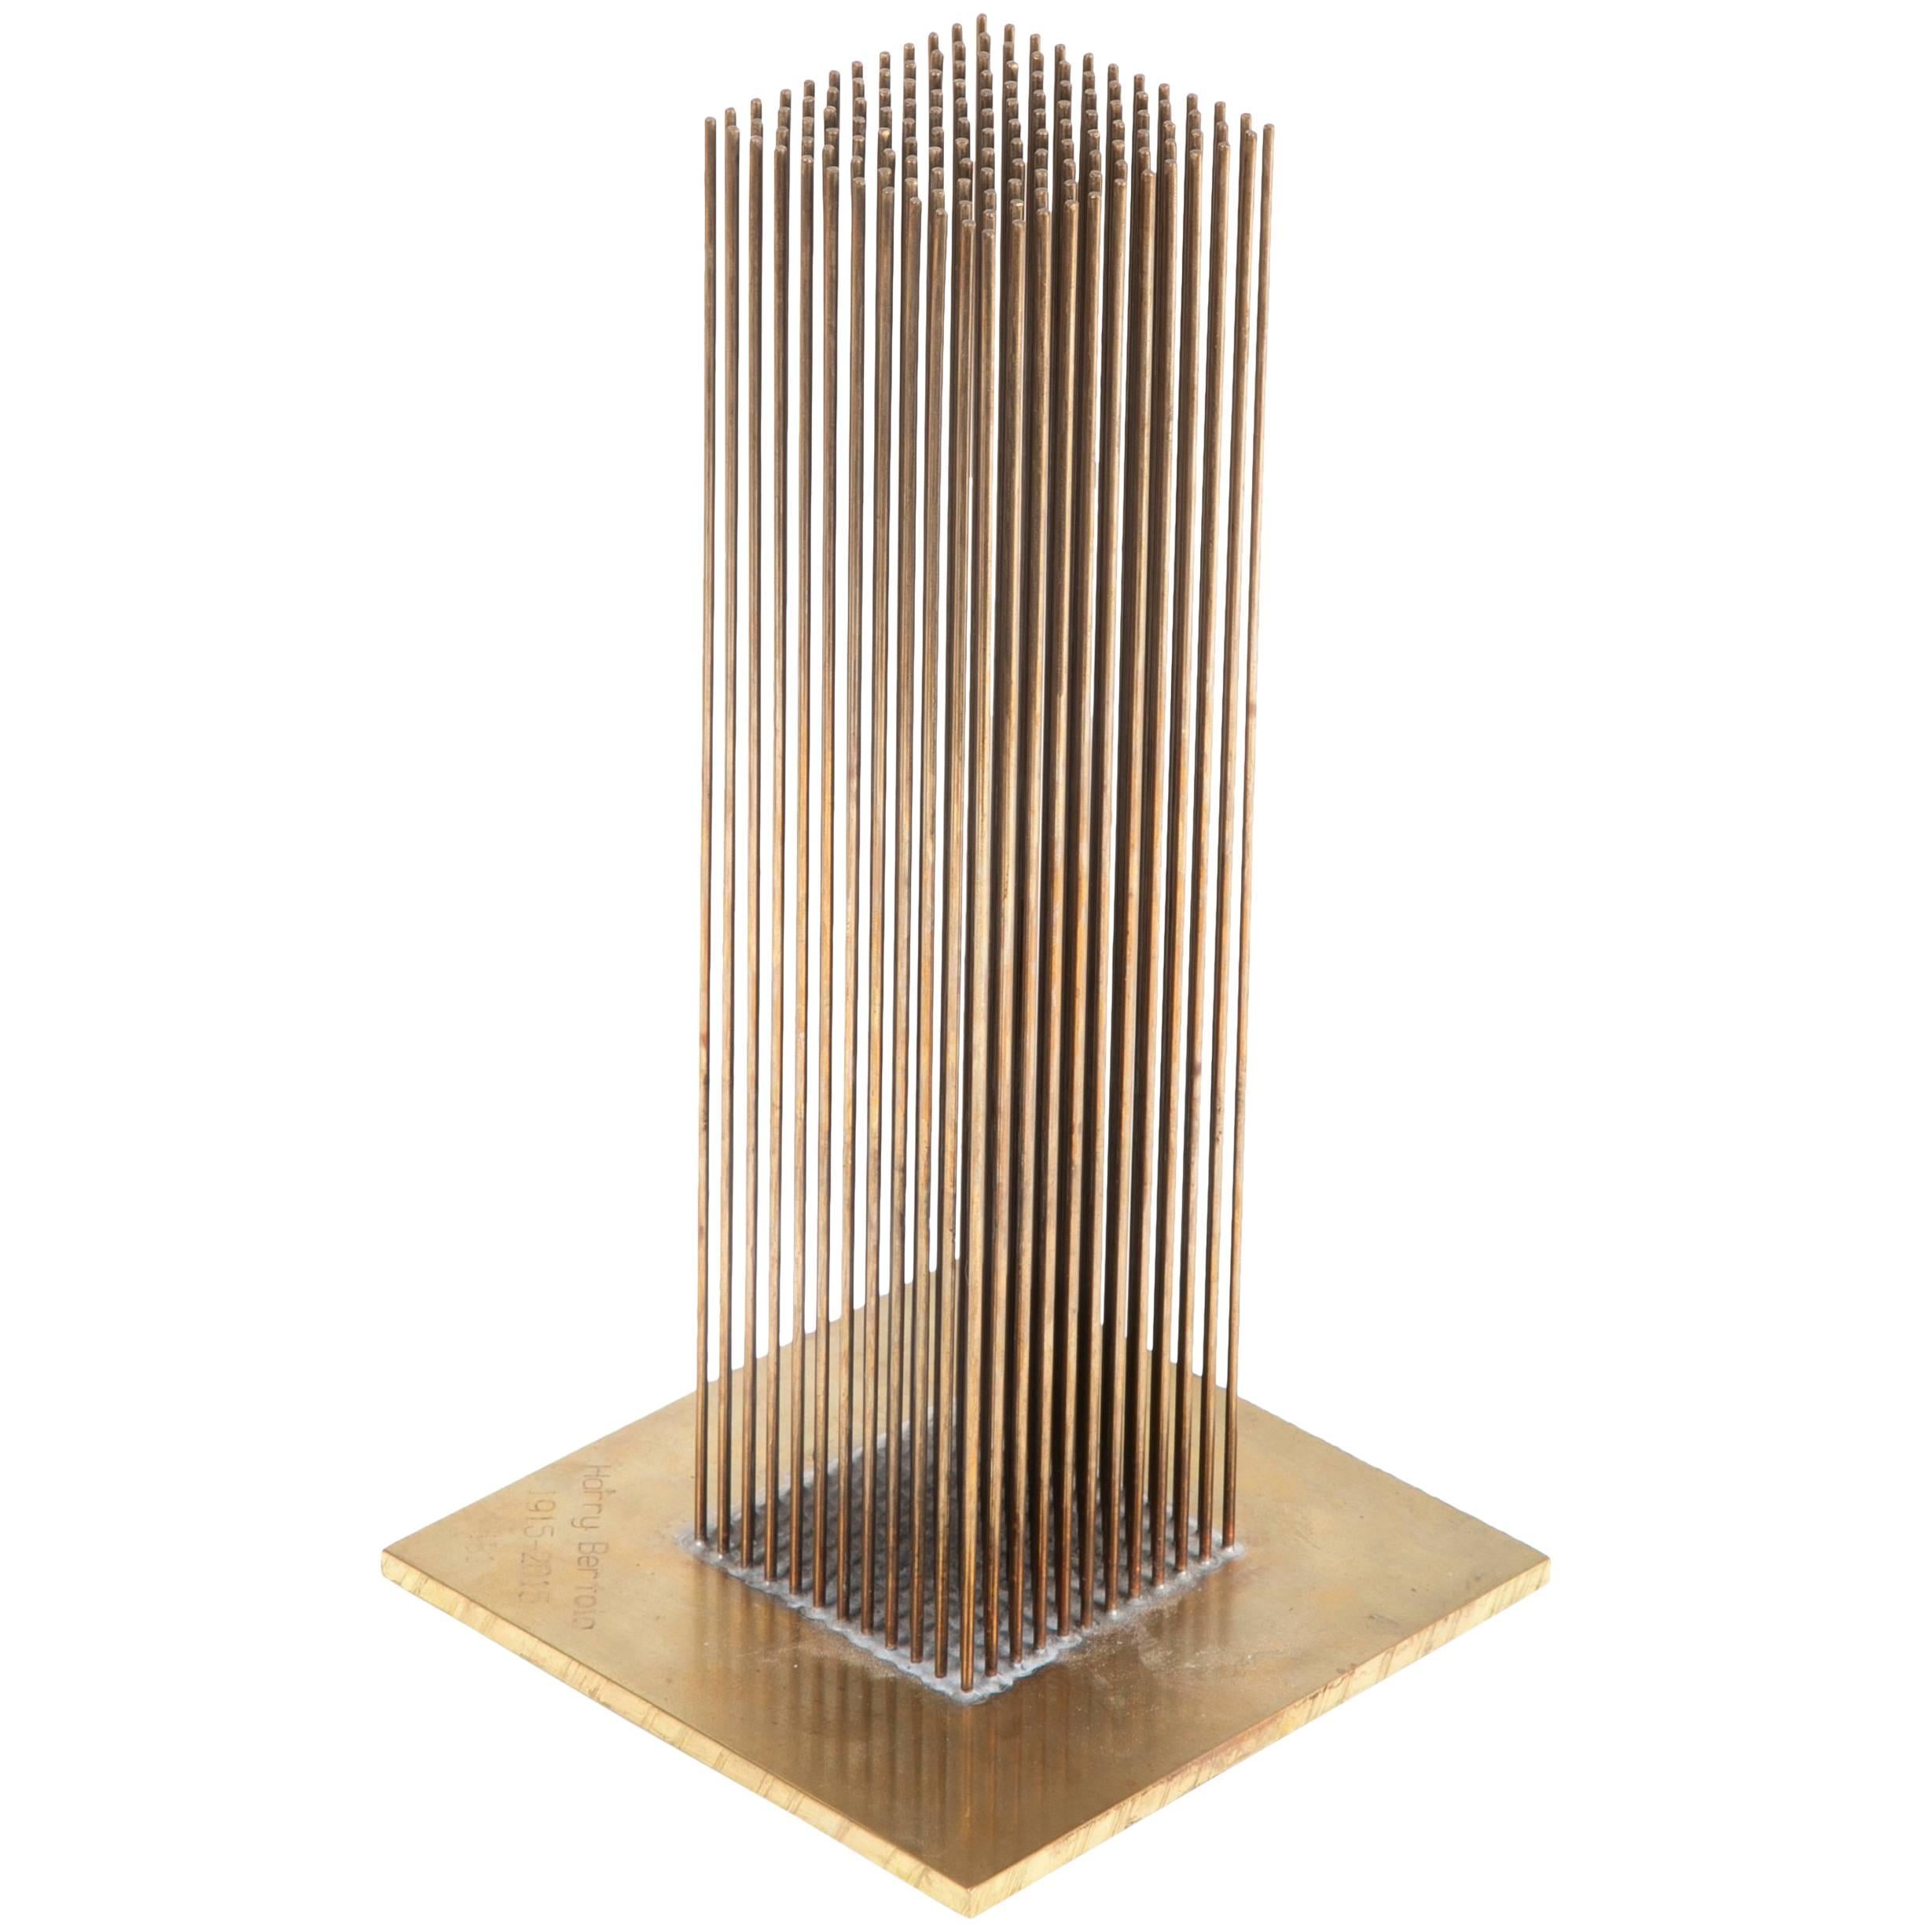 Limited Edition Sonambient Sculpture Designed by Harry Bertoia